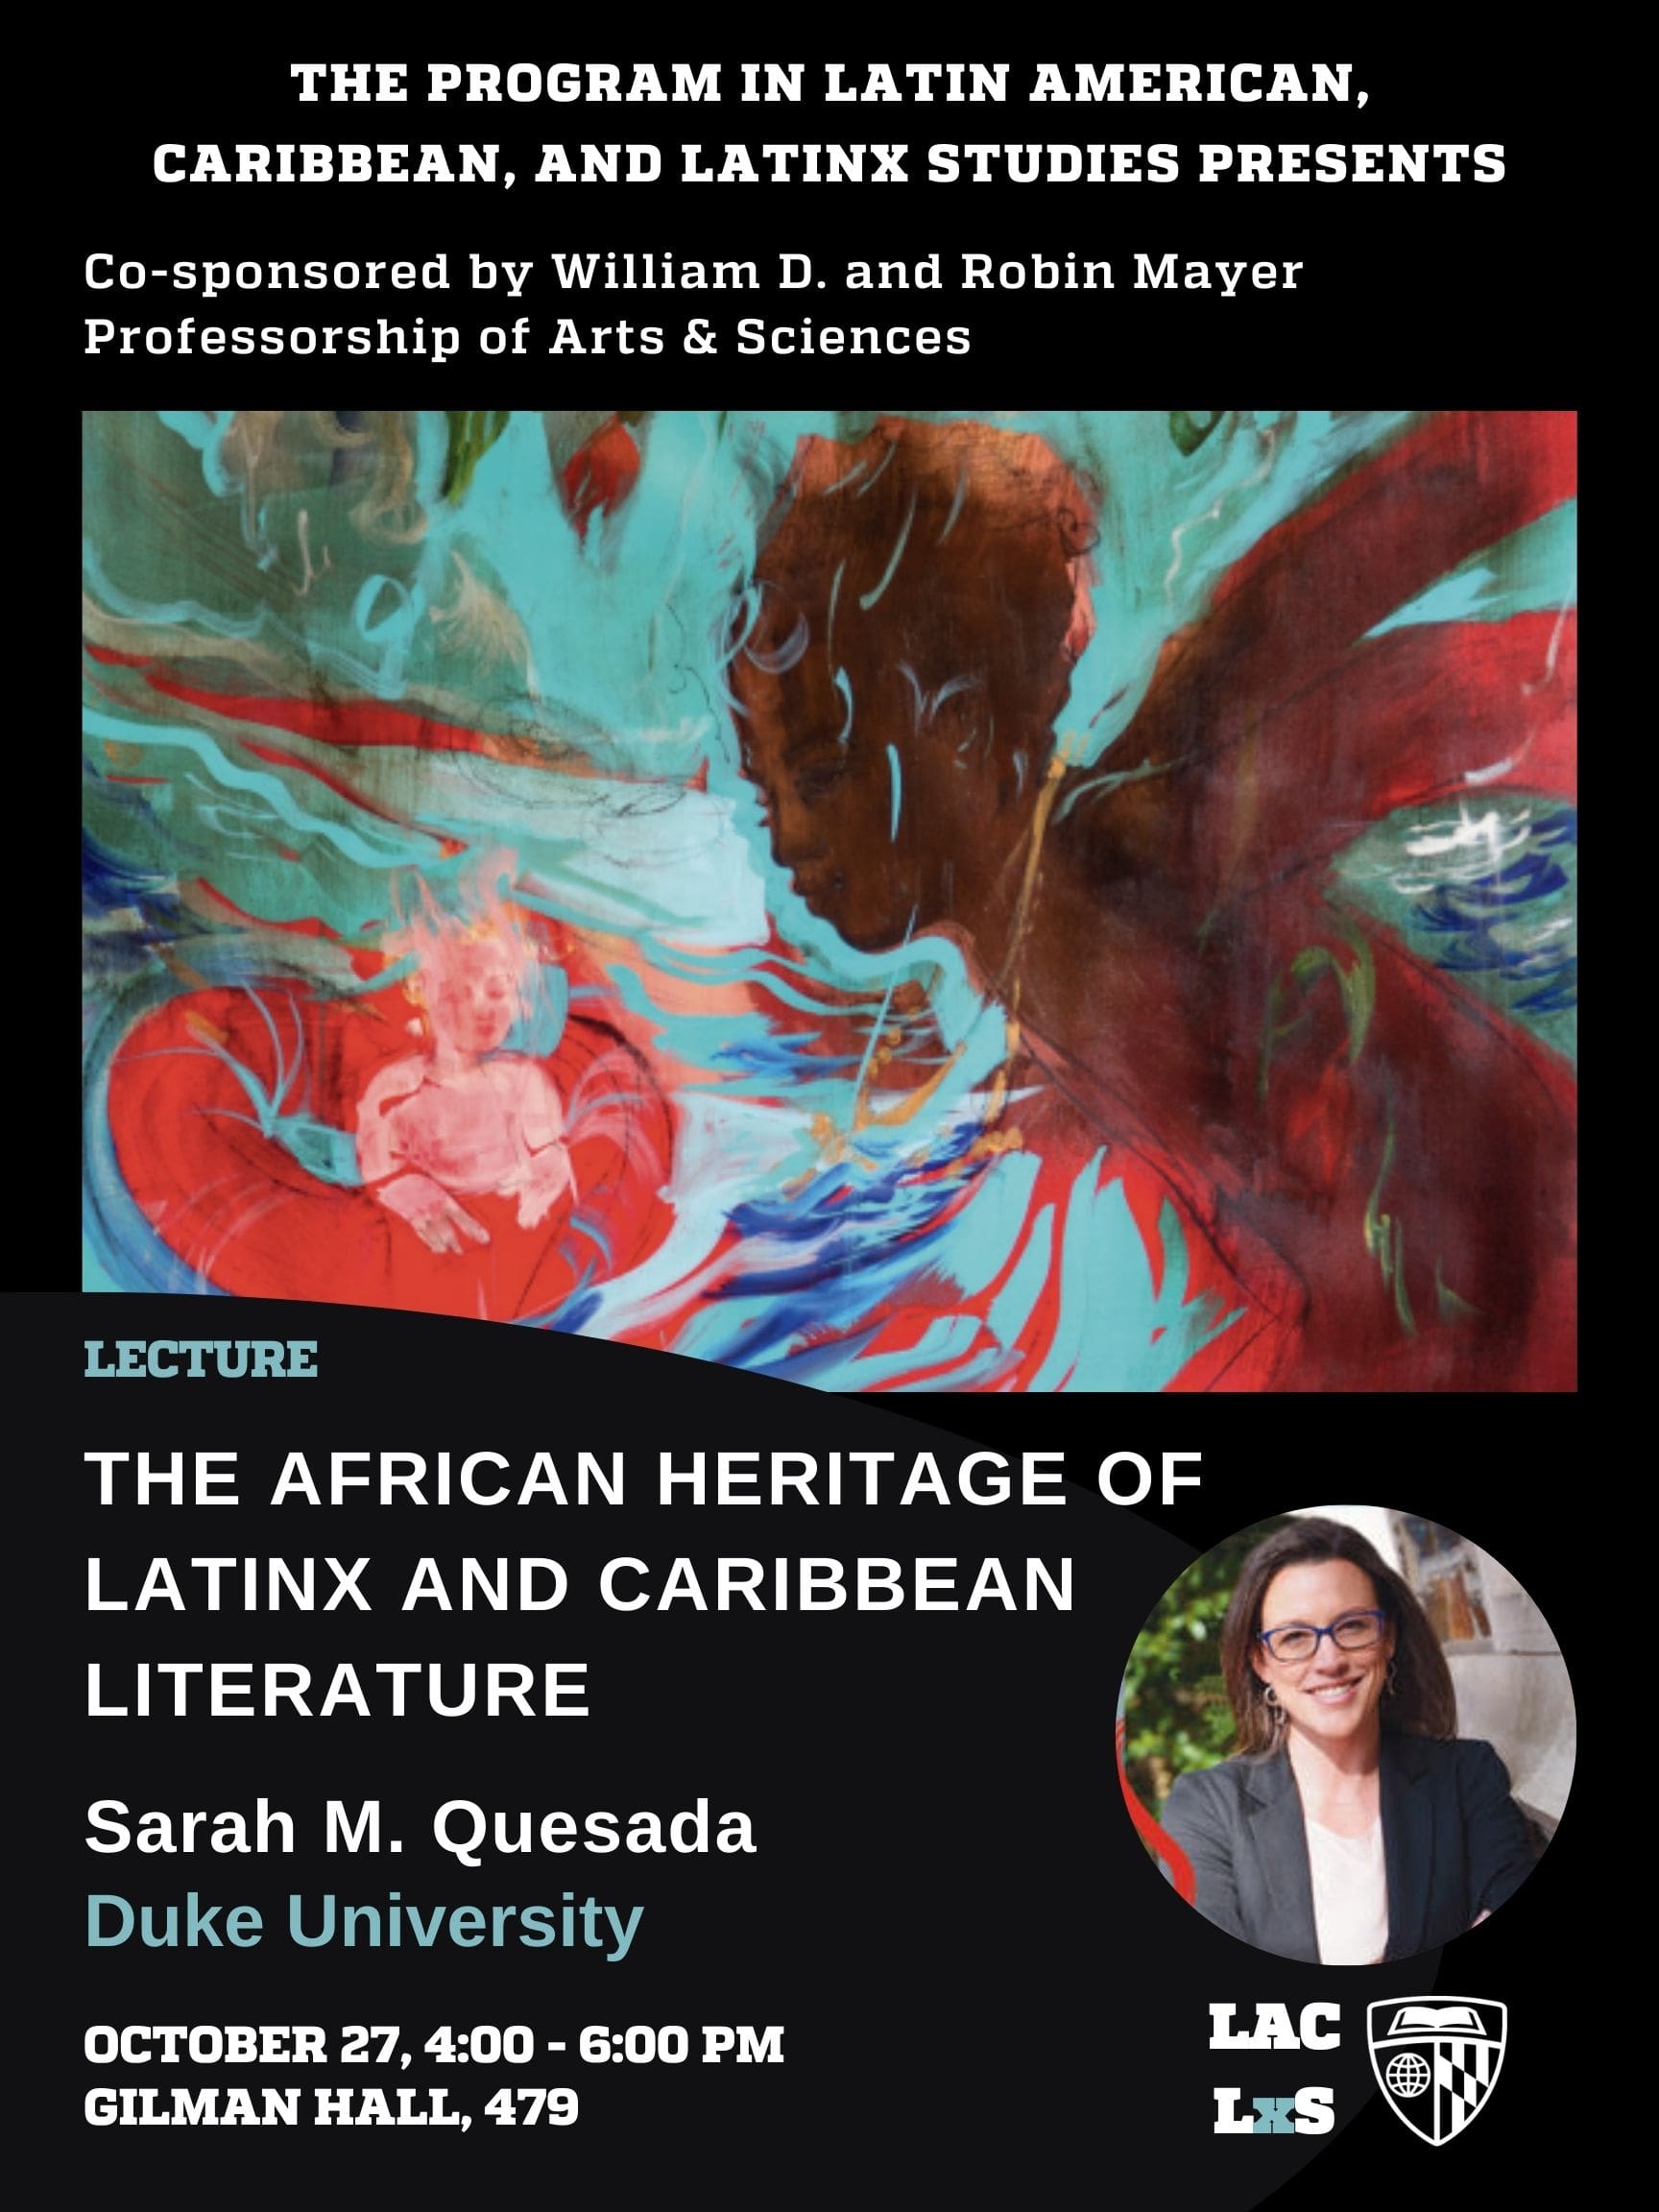 THE PROGRAM IN LATIN AMERICAN, CARIBBEAN, AND LATINX STUDIES PRESENTS Co-sponsored by William D. and Robin Mayer Professorship of Arts & Sciences LECTURE: The AFRICAN HERITAGE OF LATINX AND CARIBBEAN LITERATURE Sarah M. Quesada, Duke University OCTOBER 27, 4:00 - 6:00 PM GILMAN HALL, 479